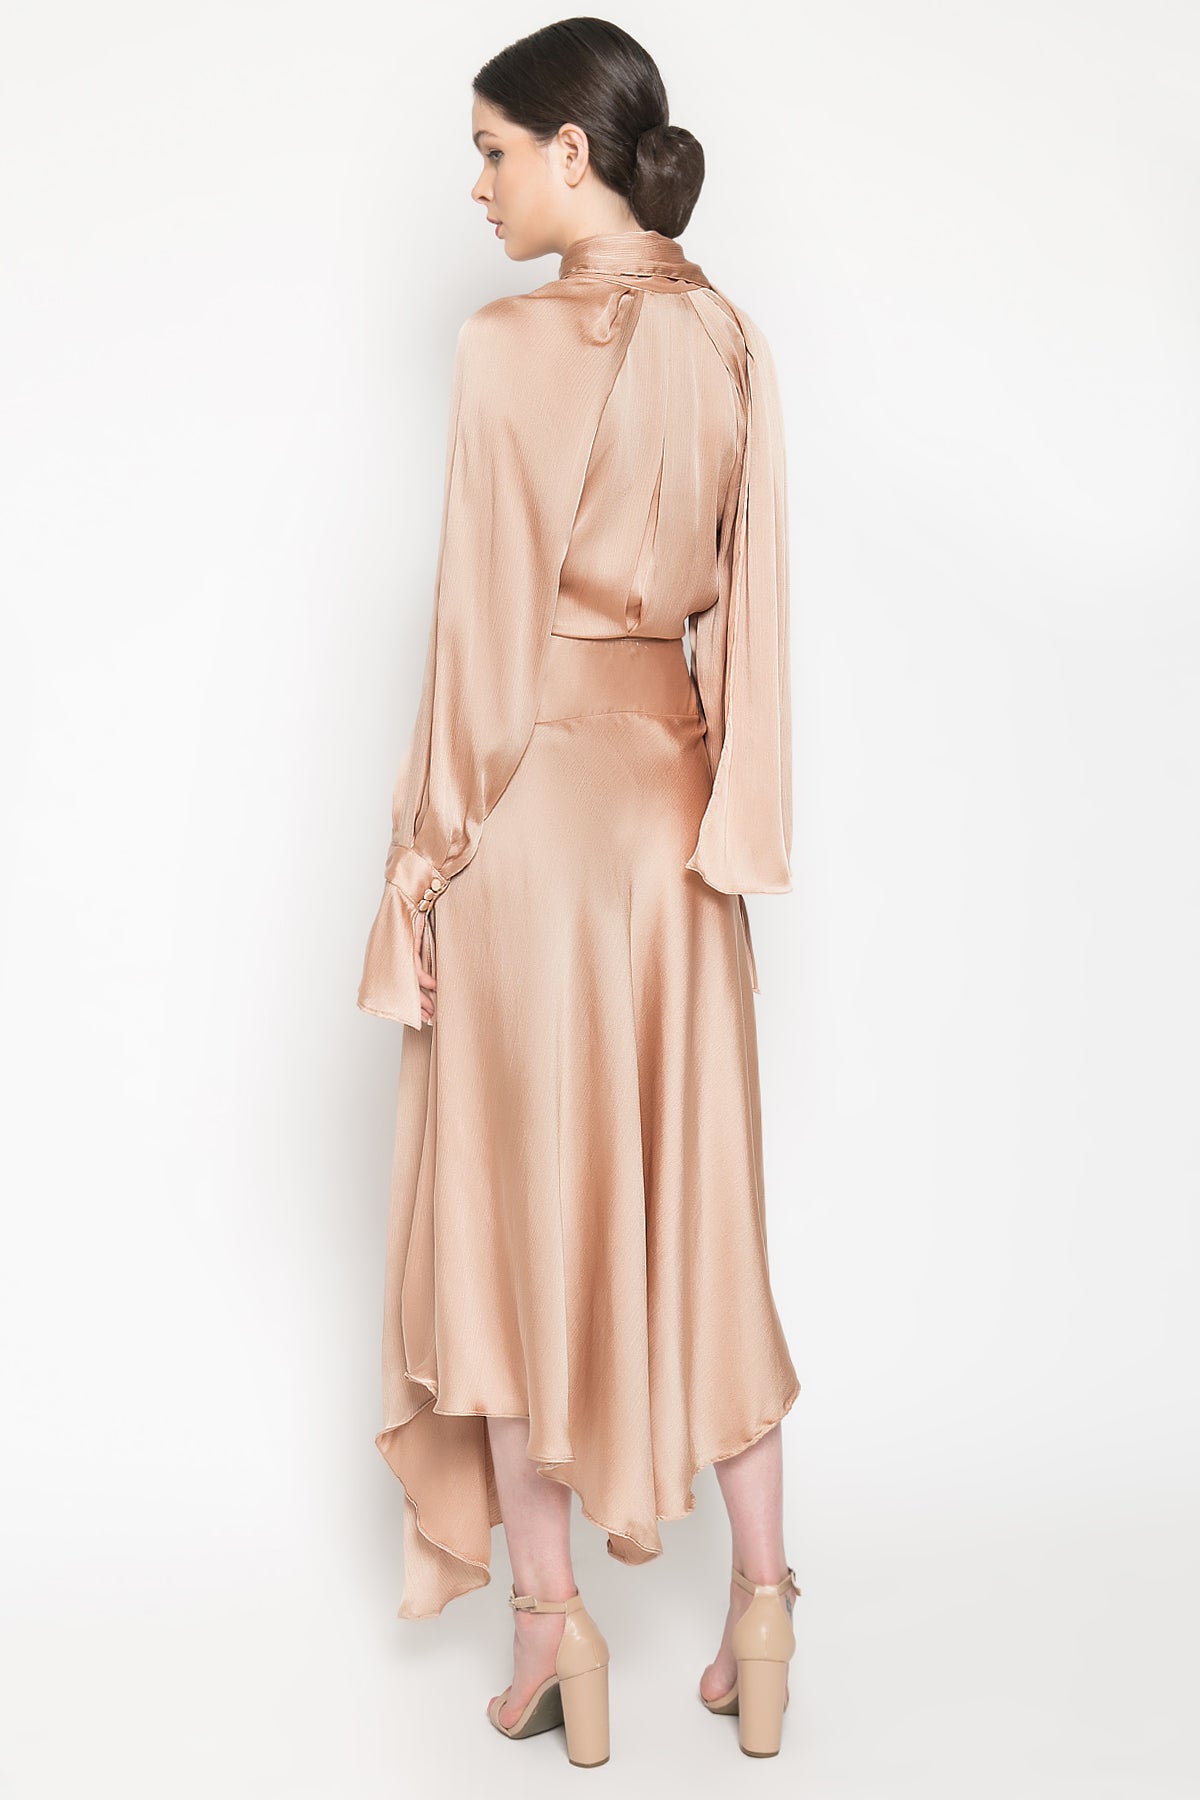 Muse Dress in Bronze